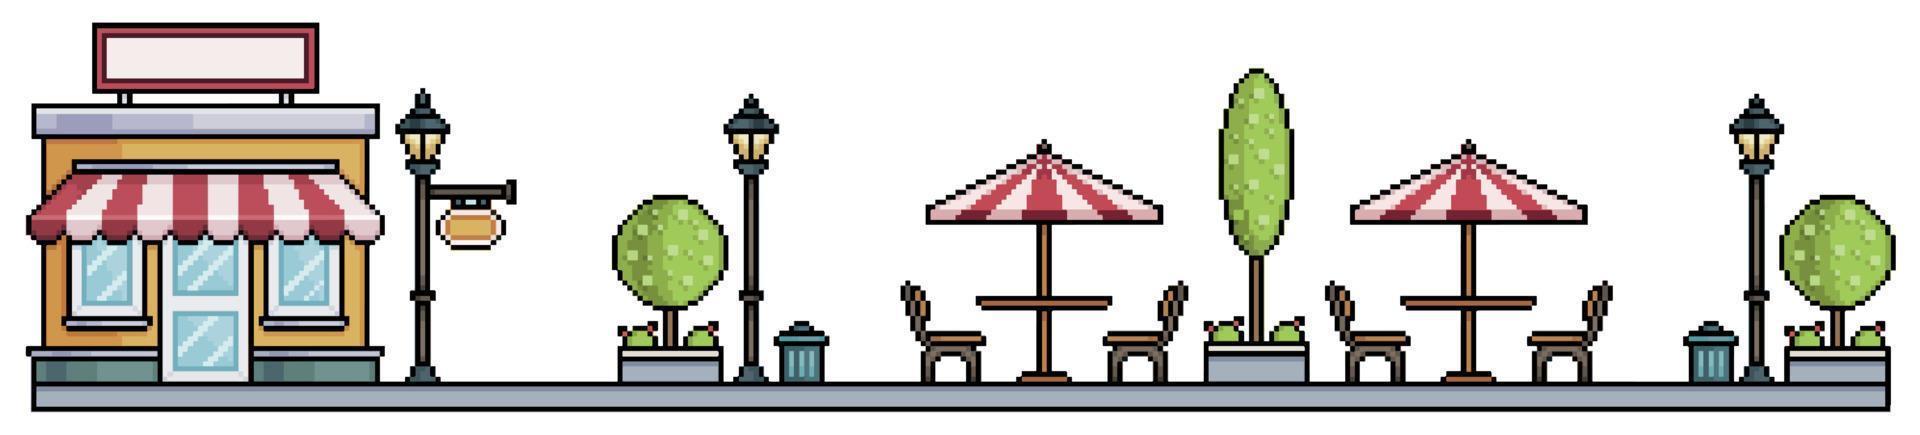 Pixel art urban square with shop park with tree, flowerbeds, benches, tables, pots and trash can Urban landscape. Cityscape background for 8bit game vector